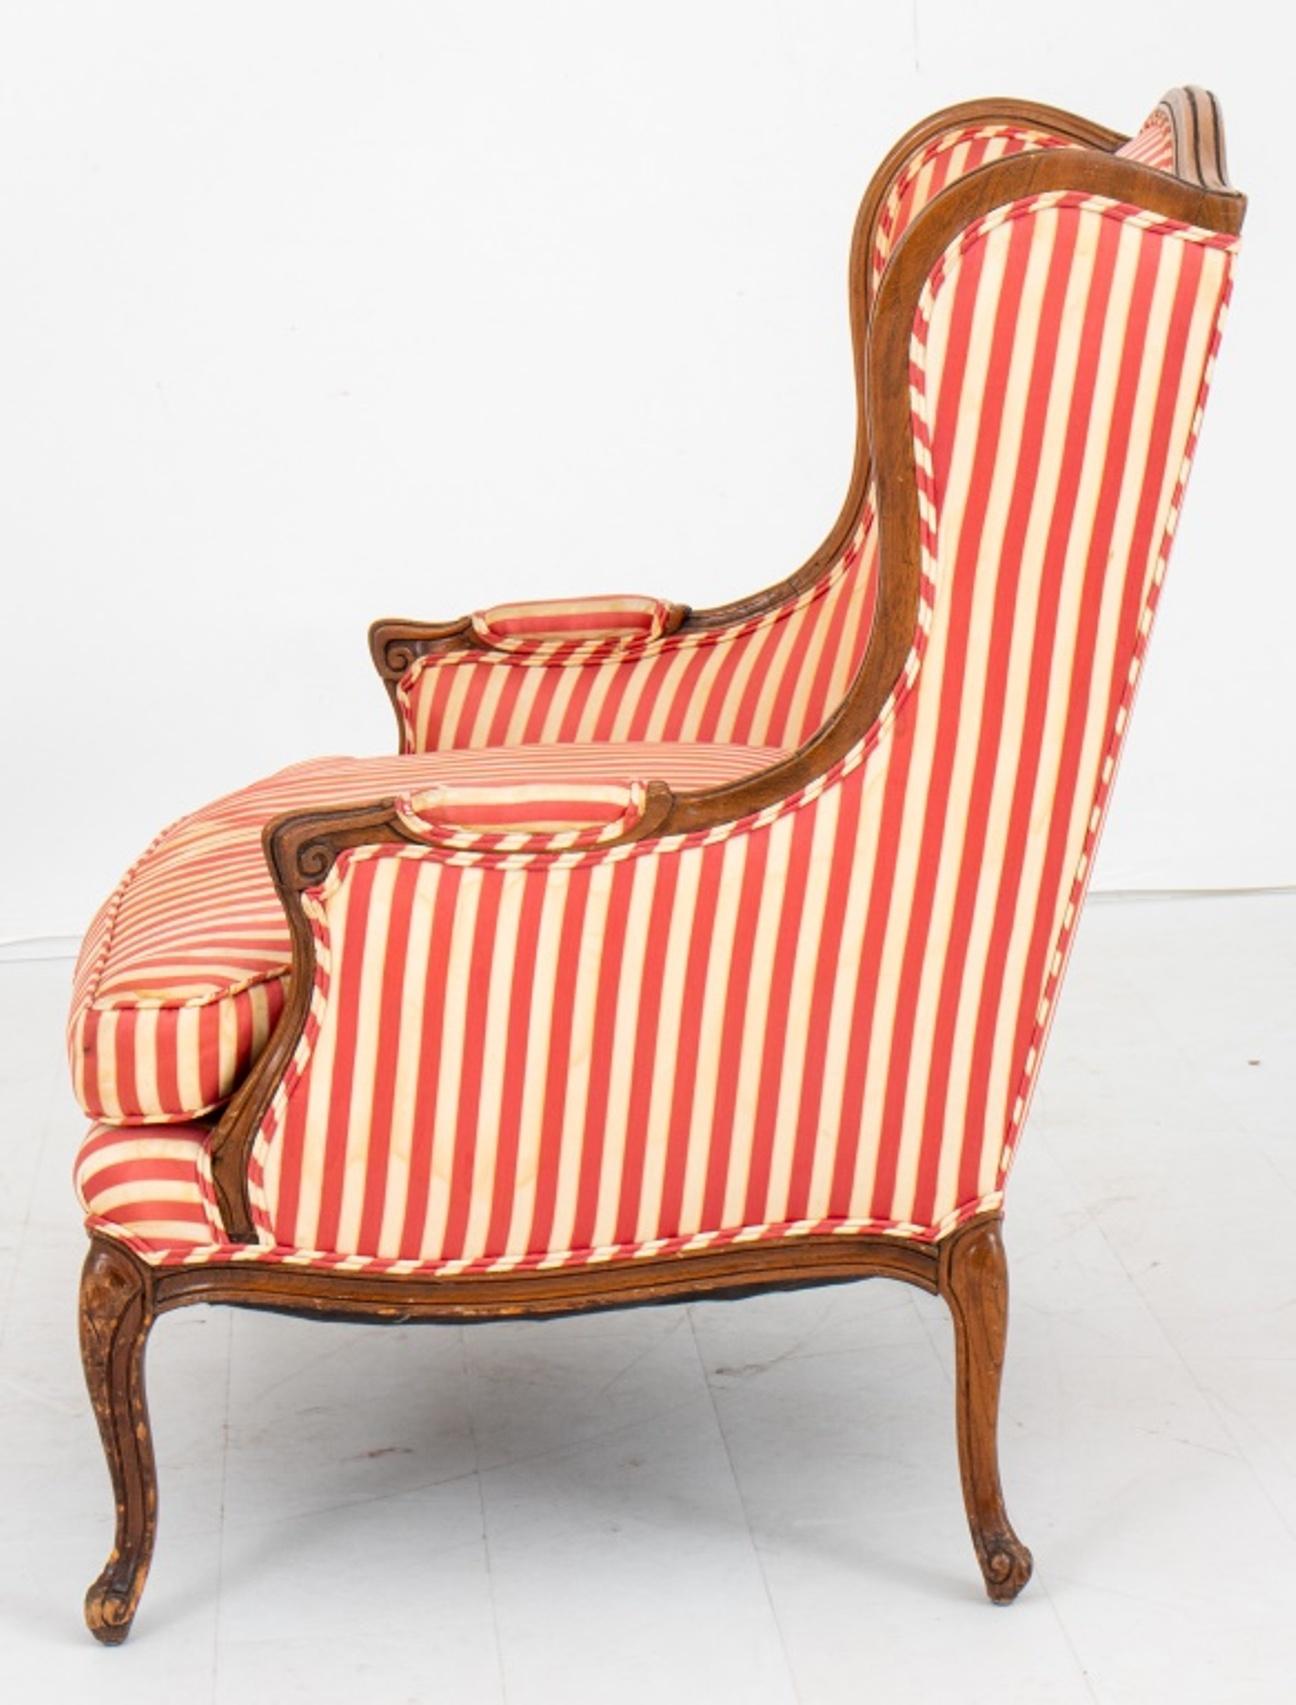 Louis XV style wing chair or bergere, overall upholstered in a red and white awning stripe, the molded frame above four cabriole legs.

Dimensions: 38